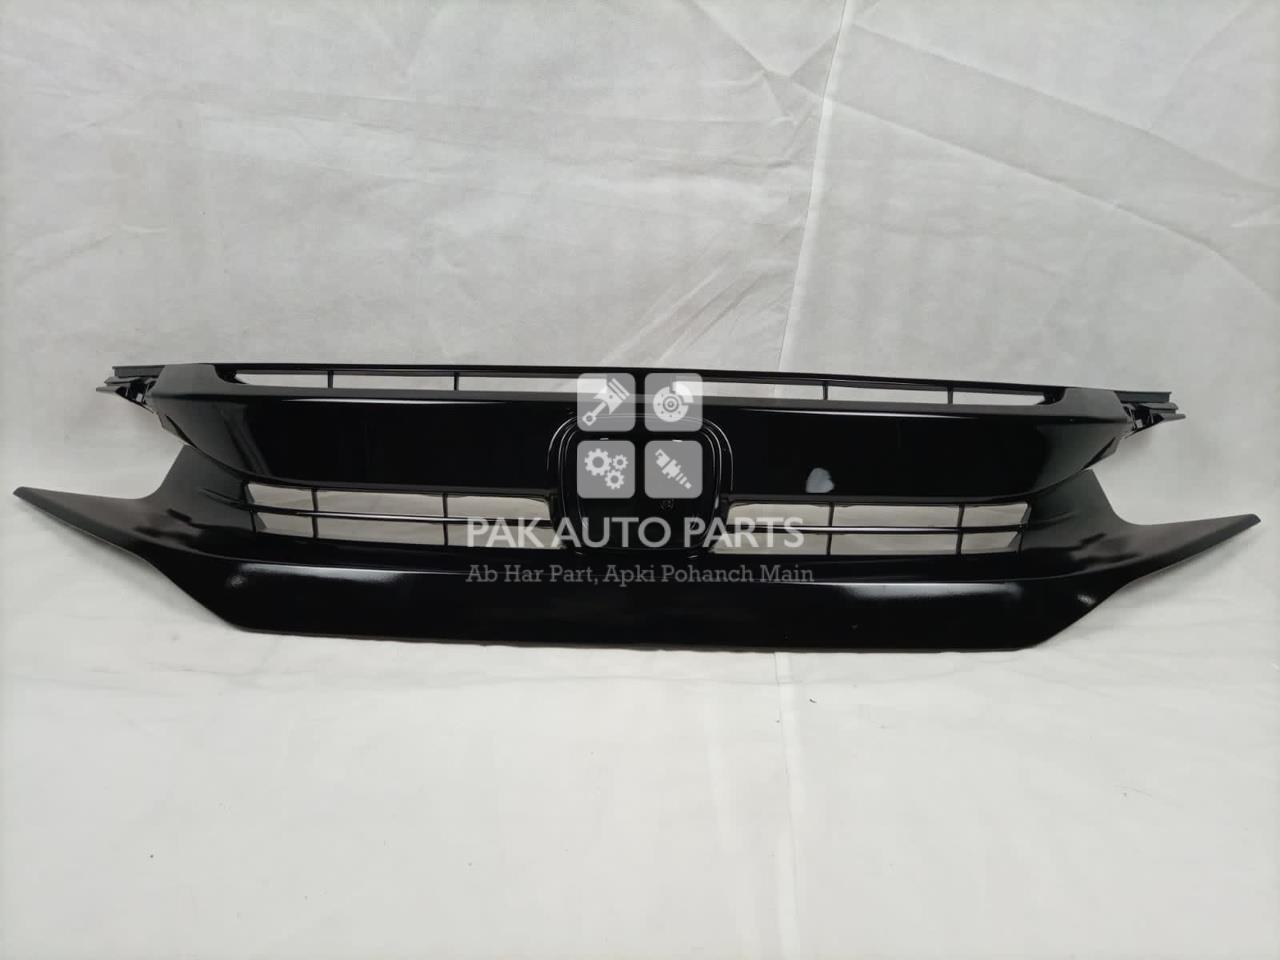 Picture of Honda Civic 2016-21 Front Show Grill